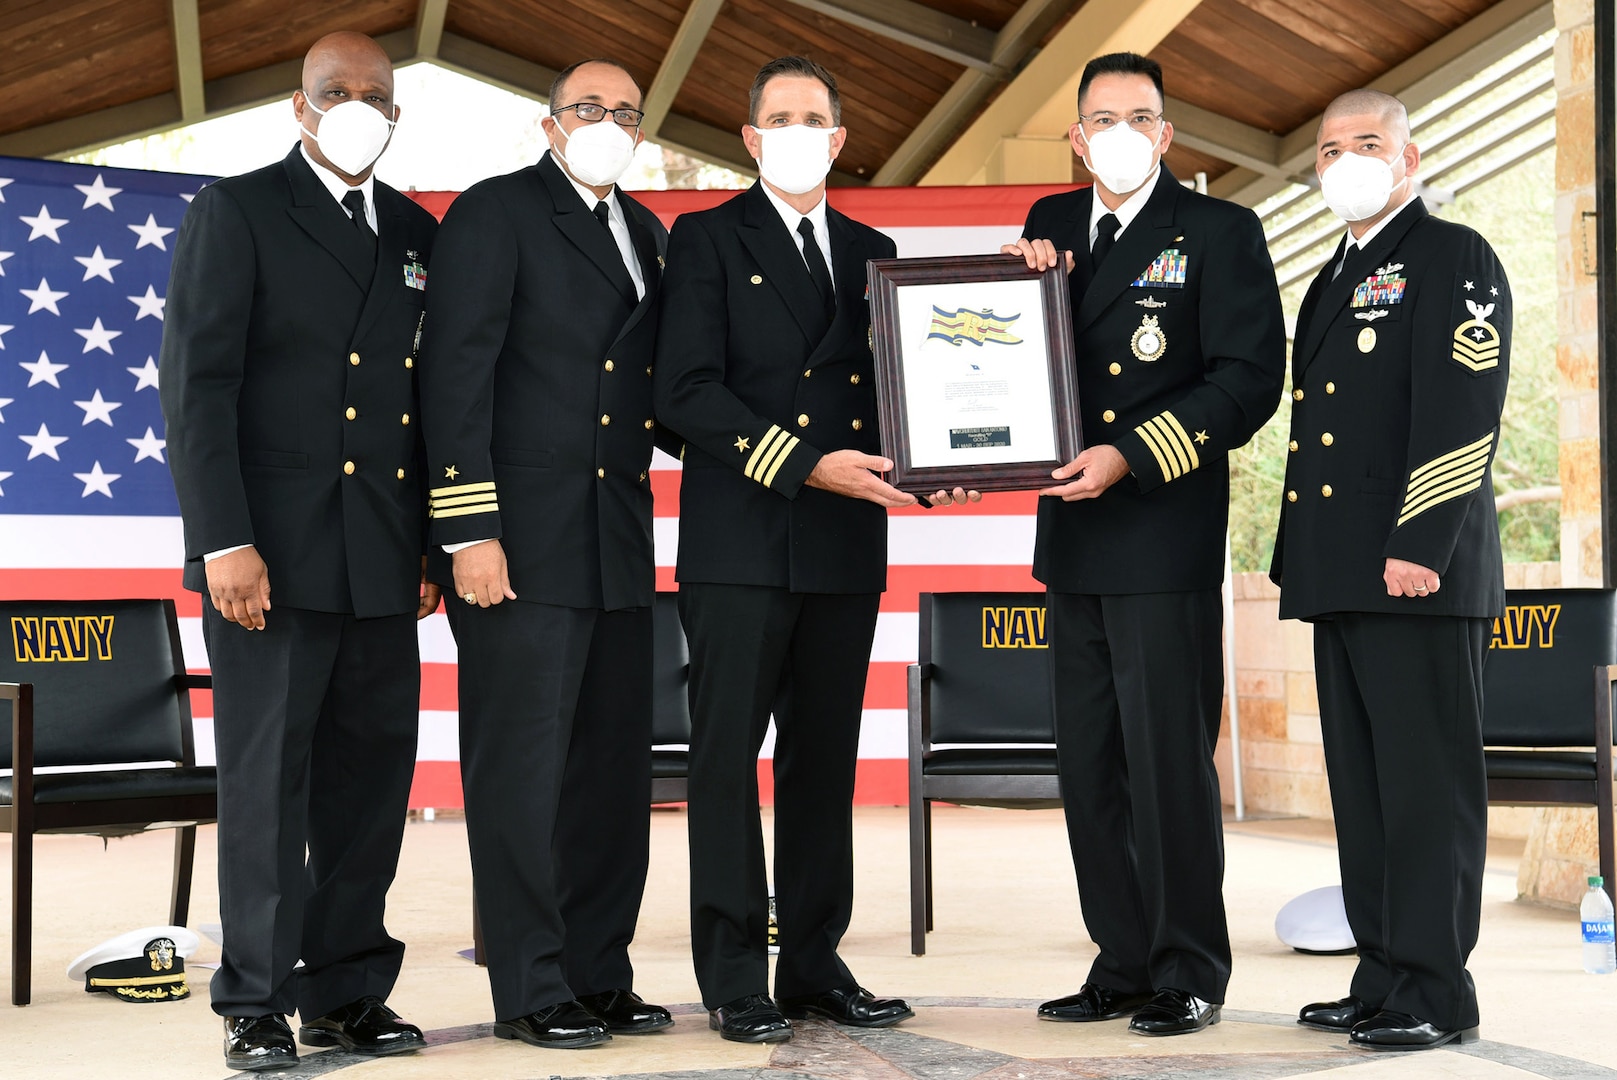 Capt. Anthony Bayungan (second from right), commodore, Region West, Navy Recruiting Command, presented the Gold “R” Award to the leadership of Navy Talent Acquisition Group San Antonio during a change of command ceremony held at the Warrior & Family Support Center at Joint Base San Antonio-Fort Sam Houston Nov. 12. The Gold “R” Award is presented to the top Navy Talent Acquistion Group, or NTAG, within NRC.